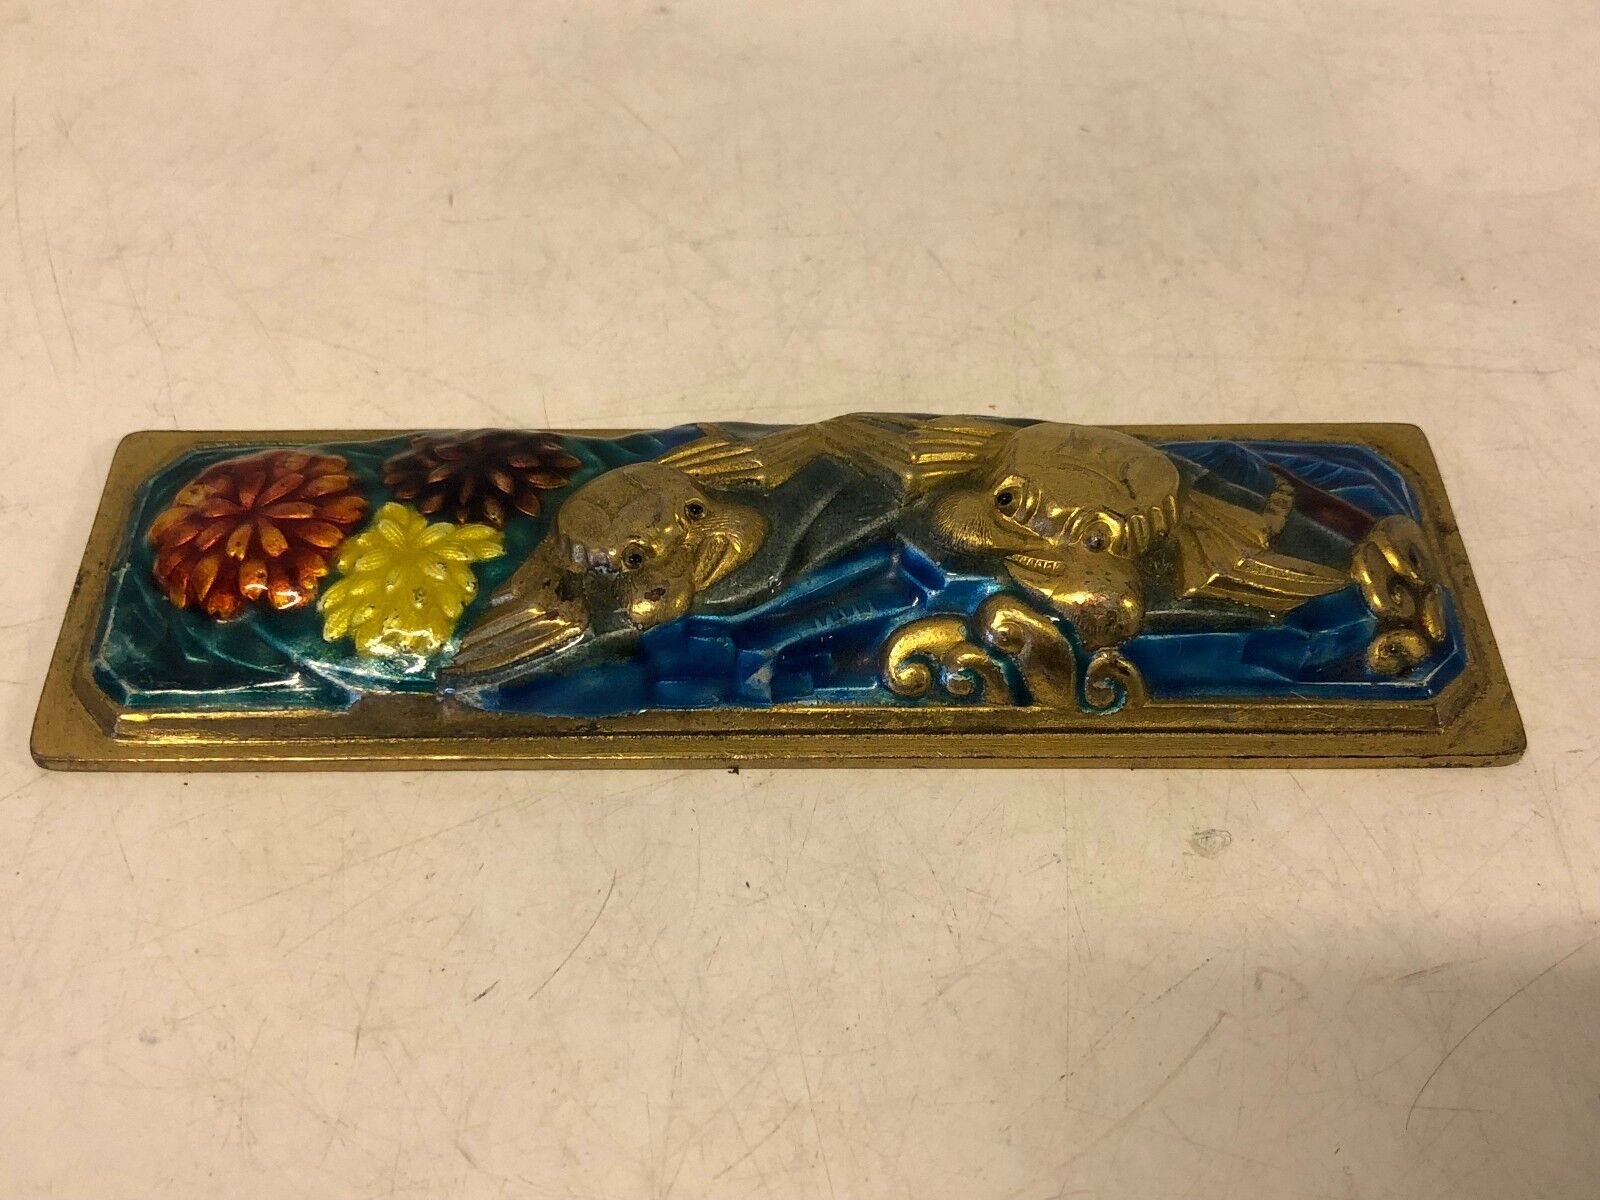 Vintage Possibly Antique Brass Enamel Paperweight with Crab Decorations